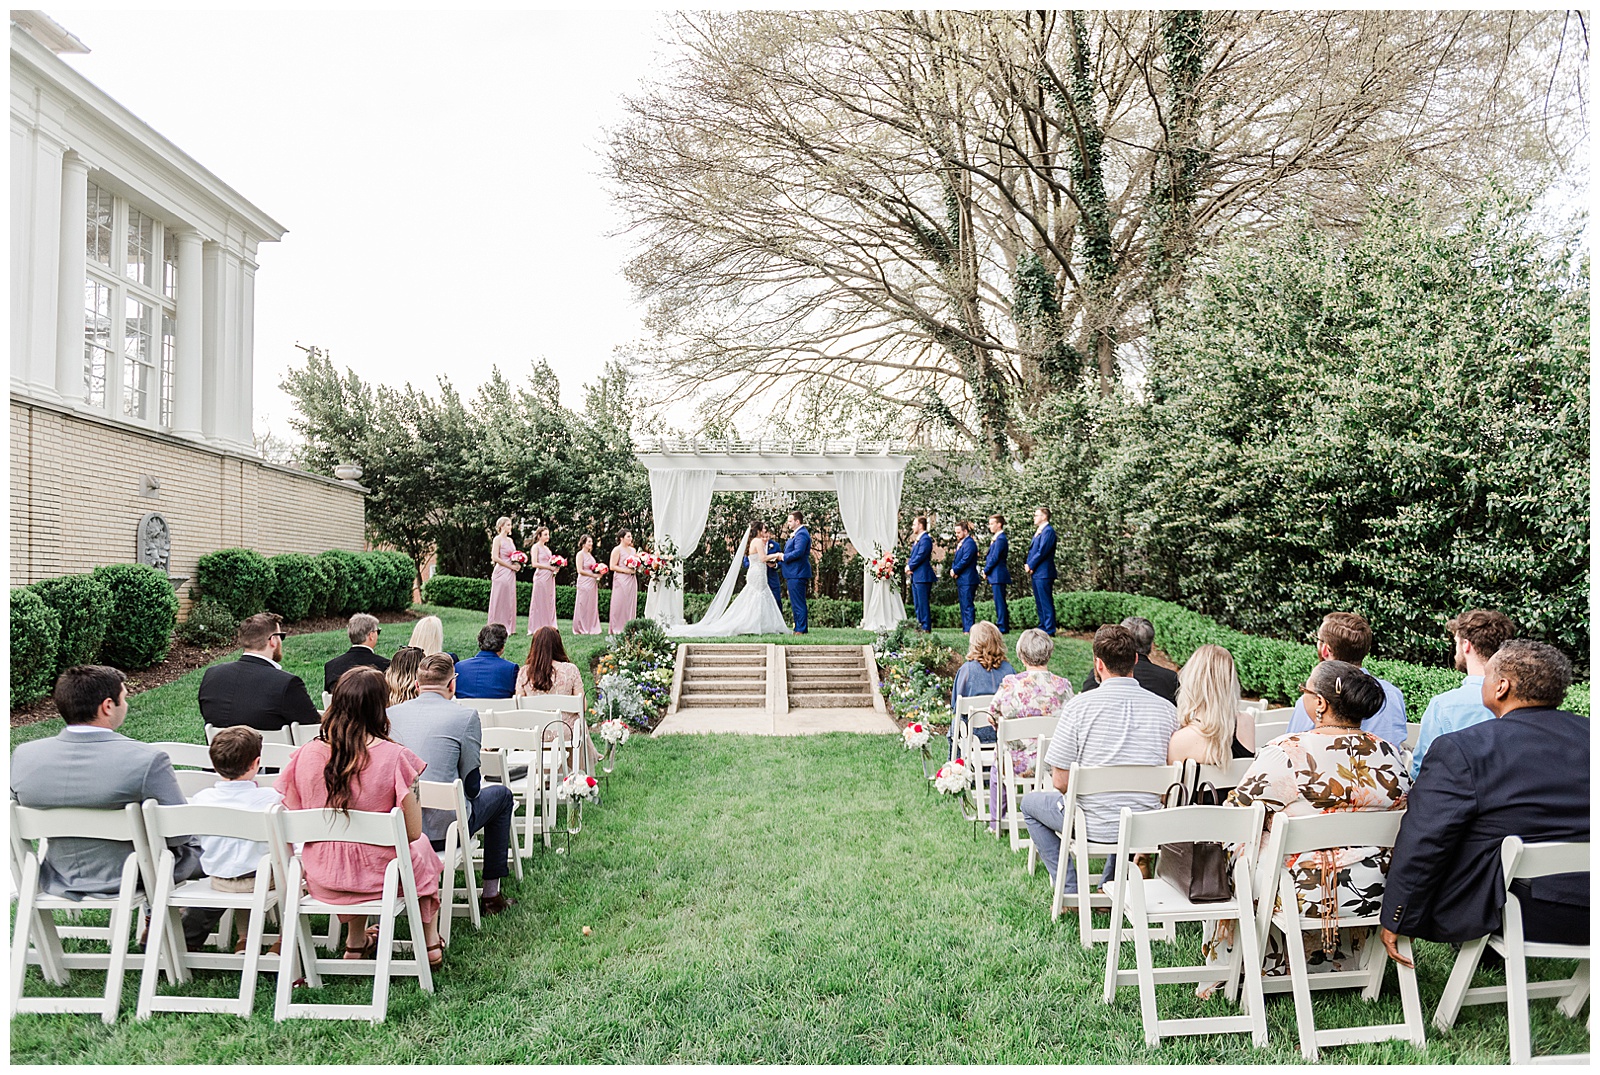 Intimate Wedding Ceremony from Light and Airy Outdoor Wedding at Separk Mansion in Gastonia, NC | Kevyn Dixon Photography